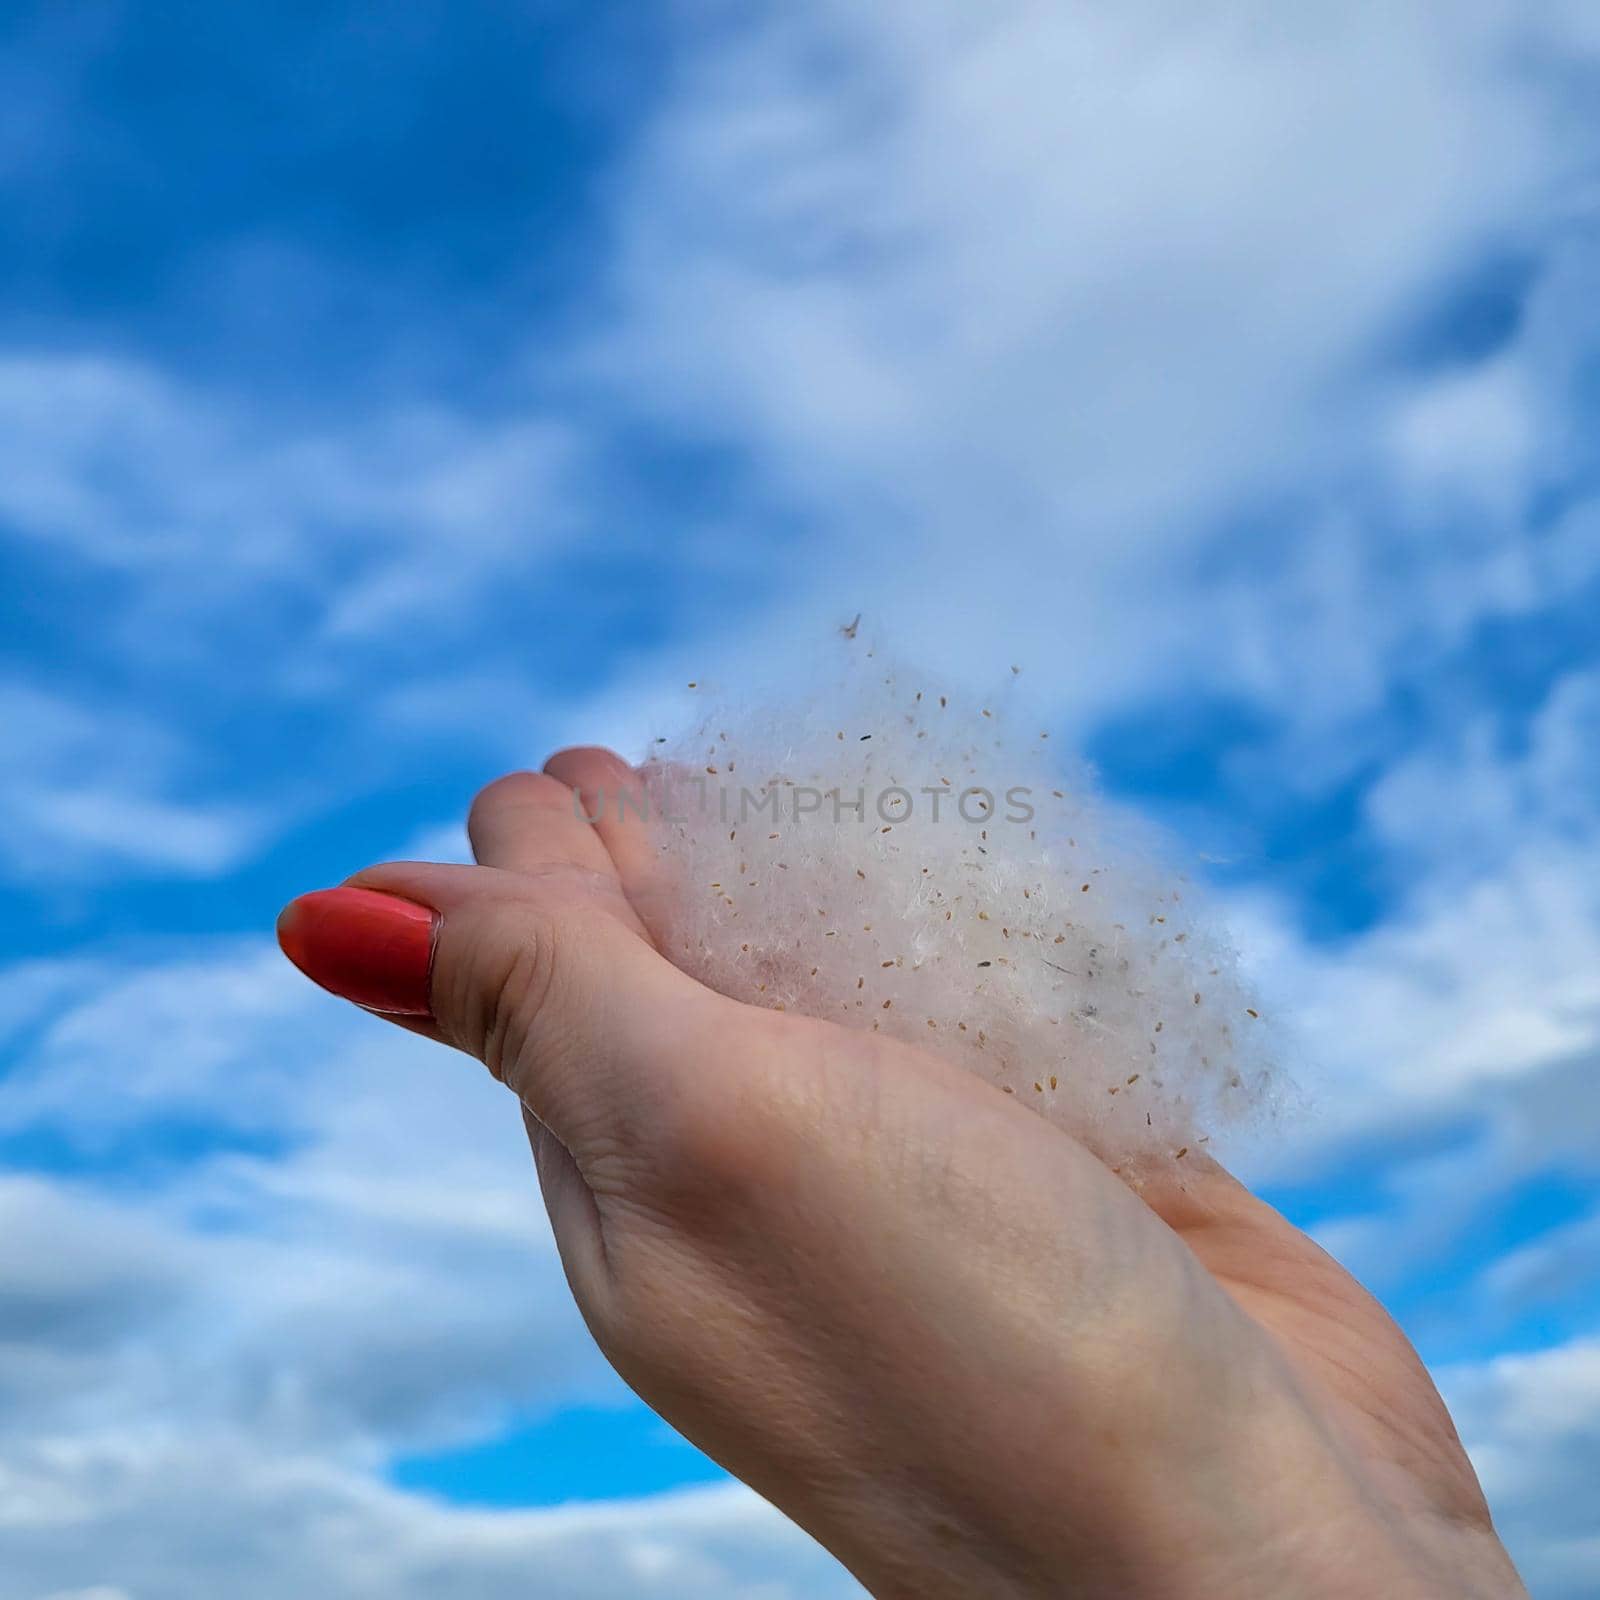 Poplar fluff in his hand against the blue sky. Weightlessness, lightness, the concept of allergy